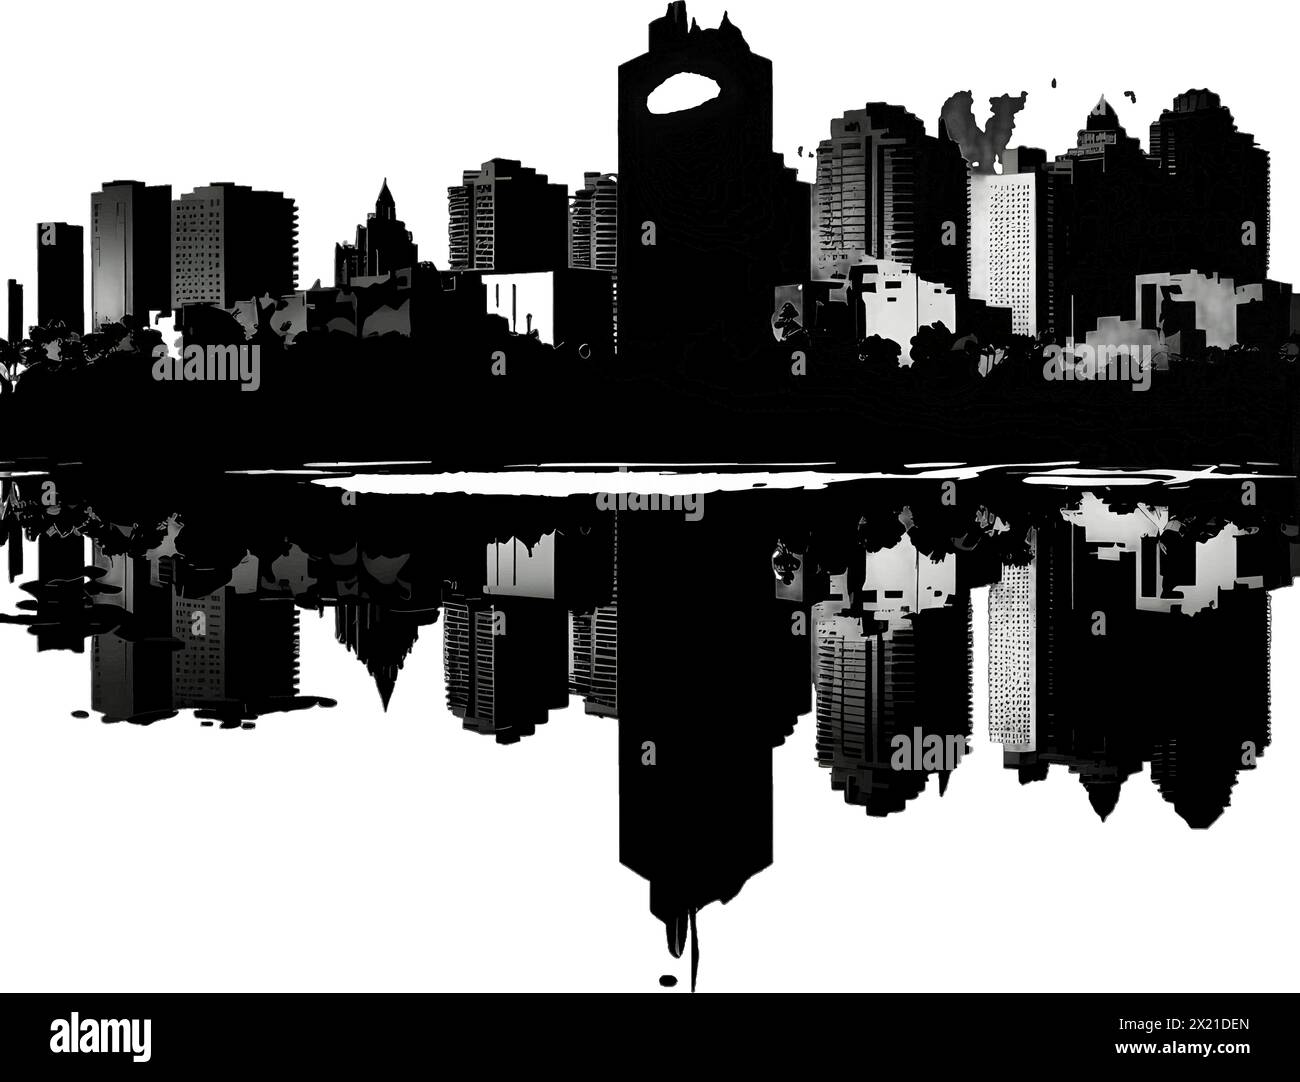 Vector illustration of city skylines in black silhouette against a clean white background, capturing graceful forms. Stock Vector